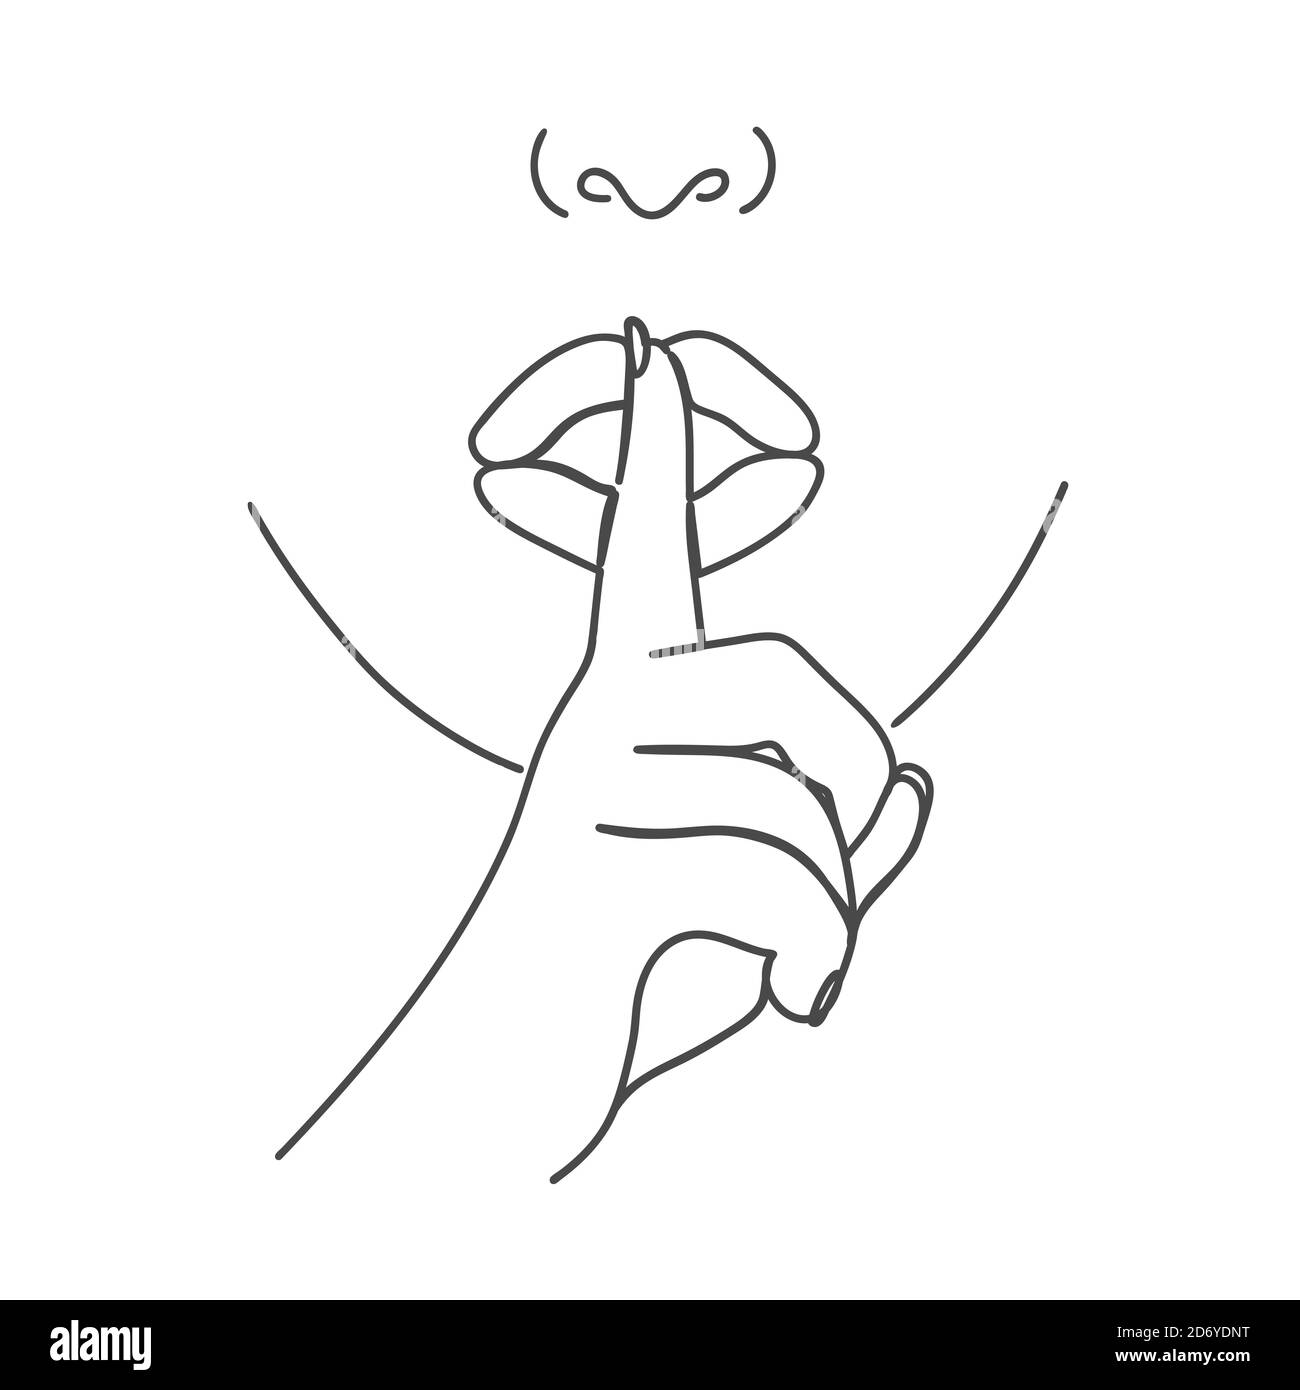 The girl put her index finger to her lips. Line art. Stock Vector